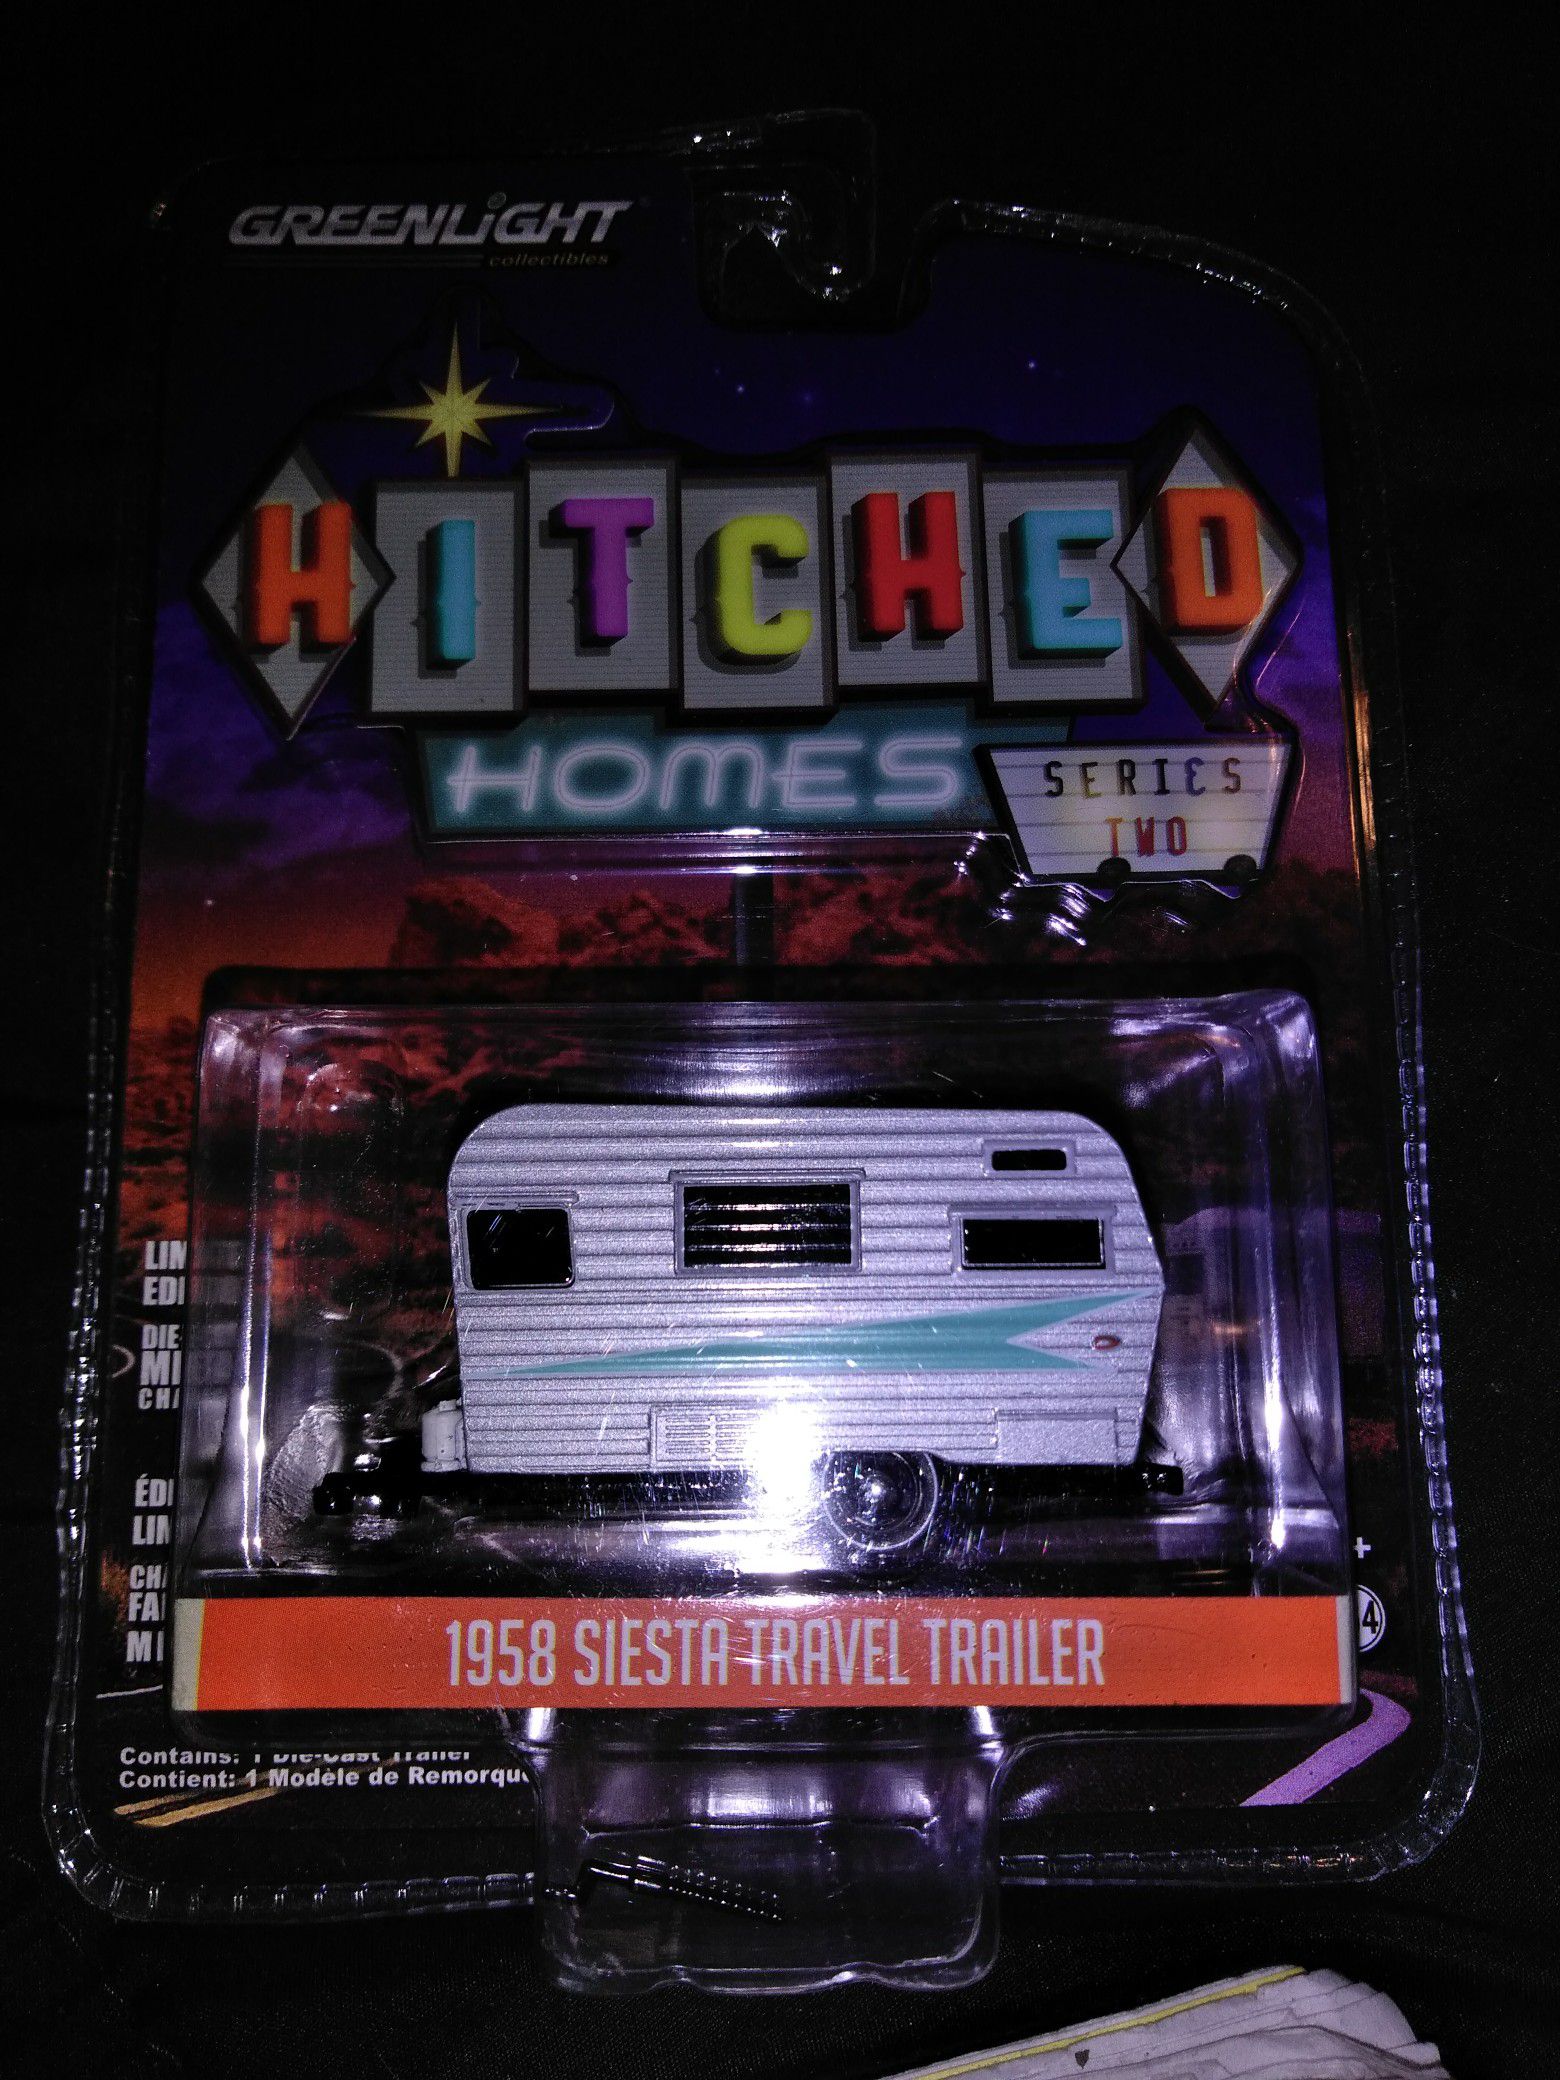 Greenlight hitched homes 59 Cadillac Deville travel trailer